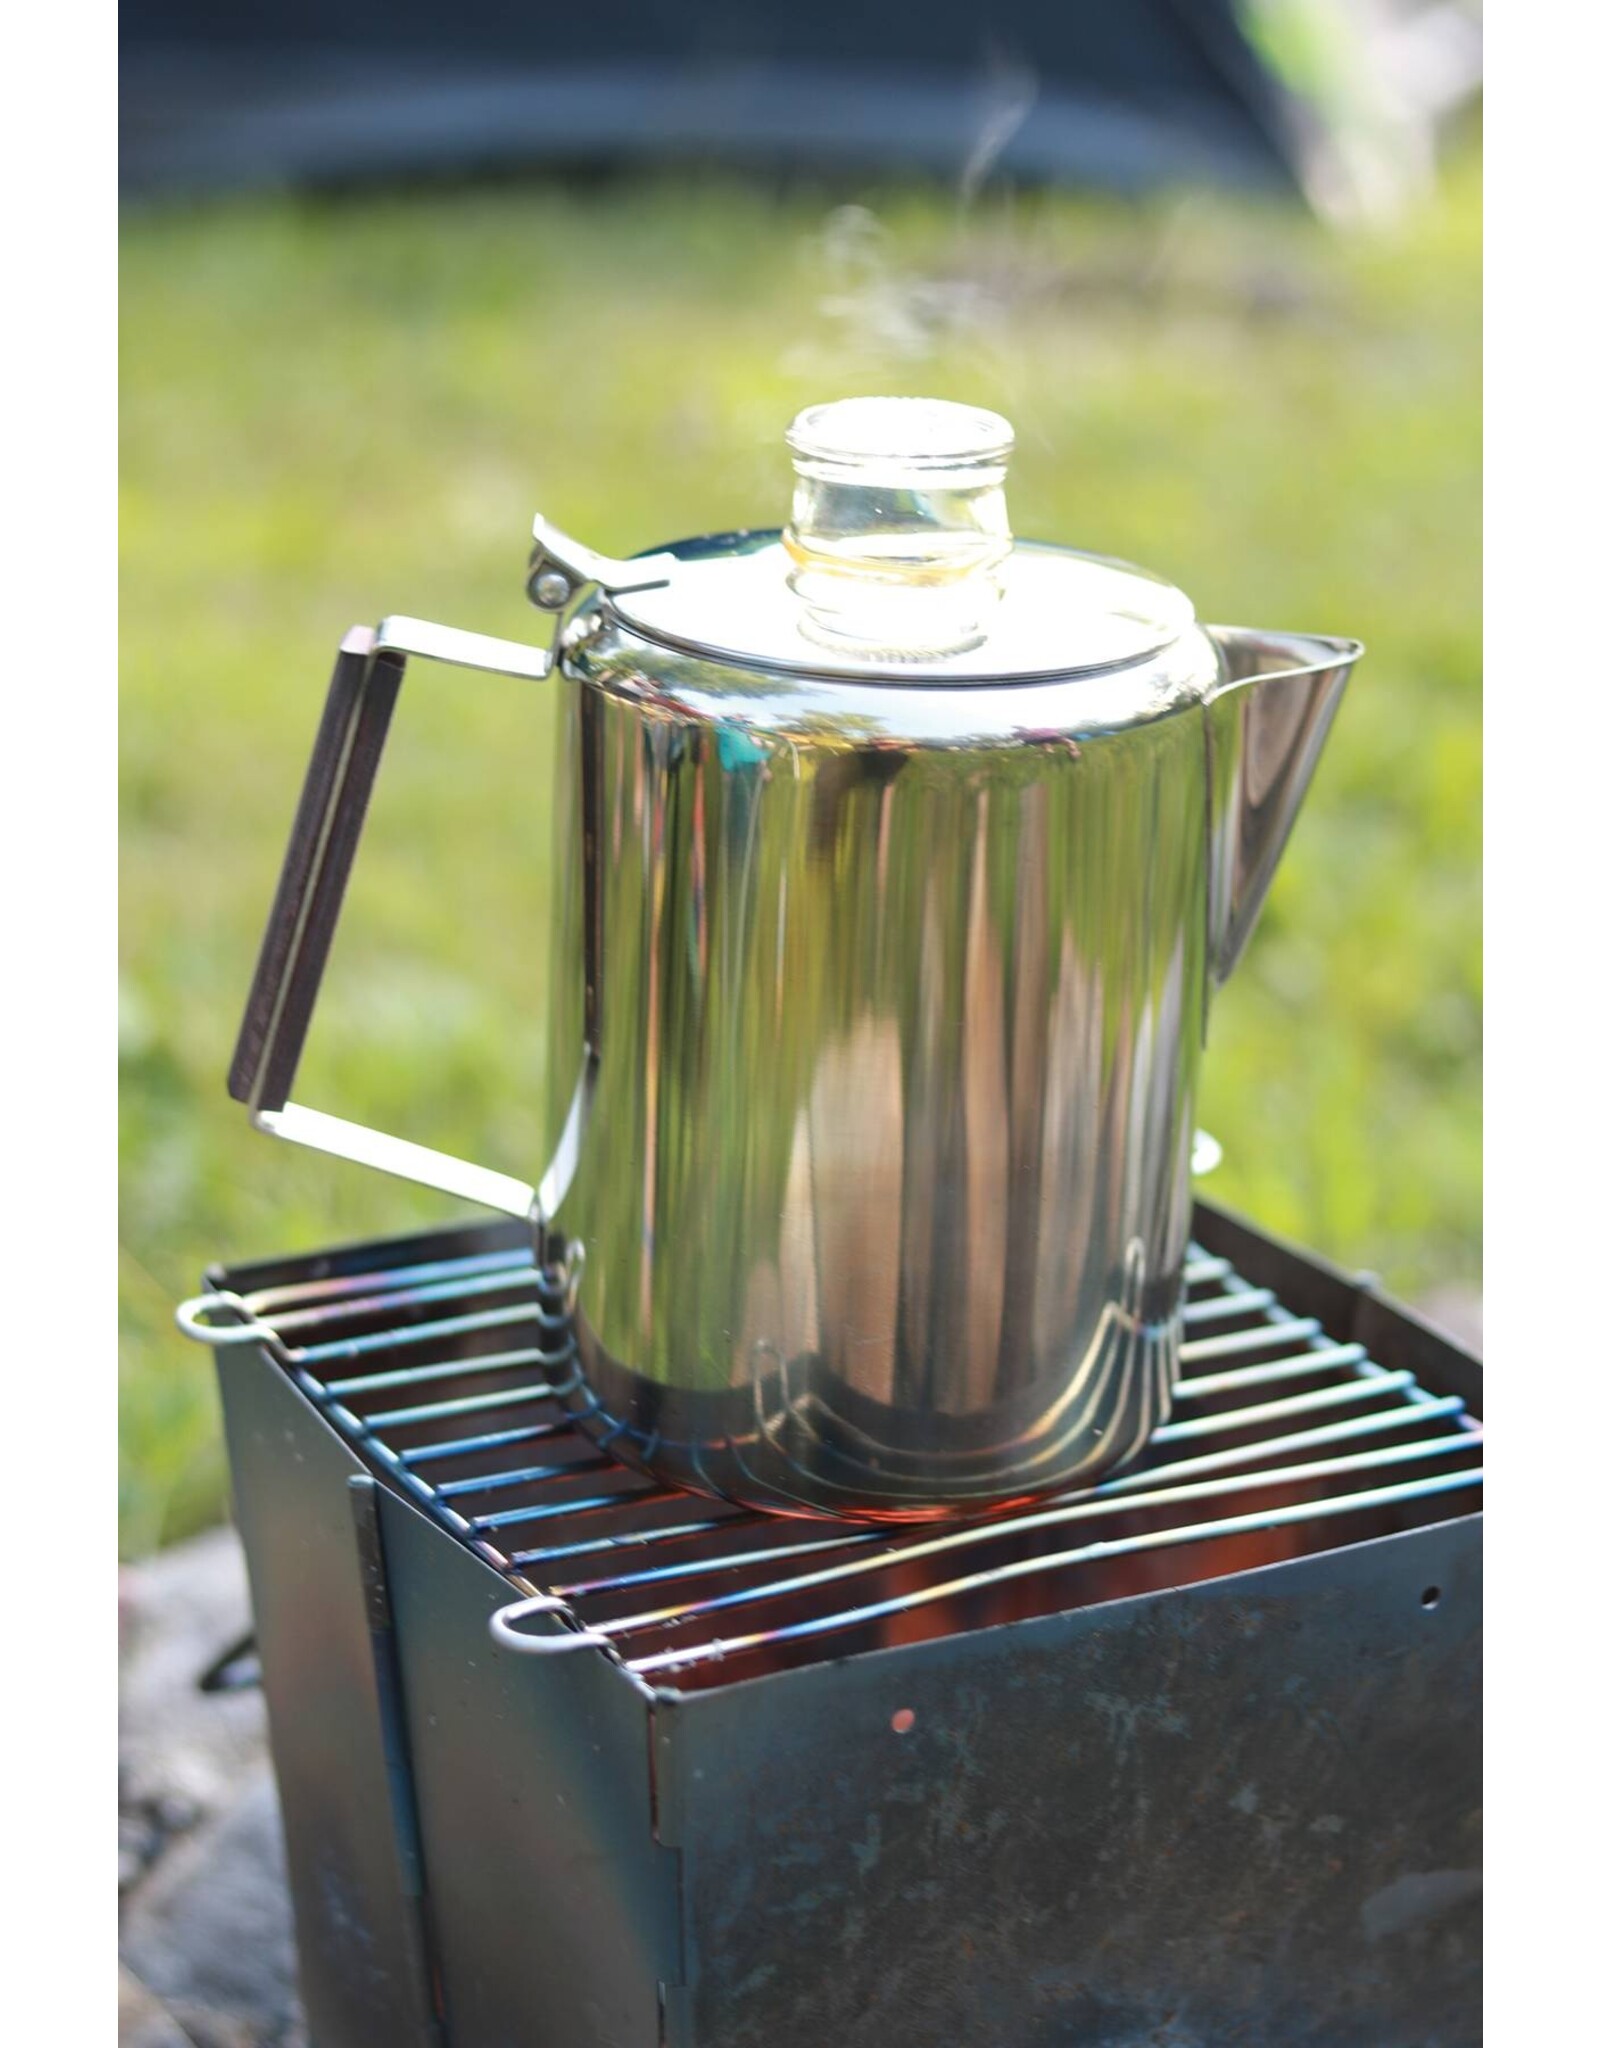 9 Cup Rapid Brew Stainless Steel Stovetop Coffee Percolator